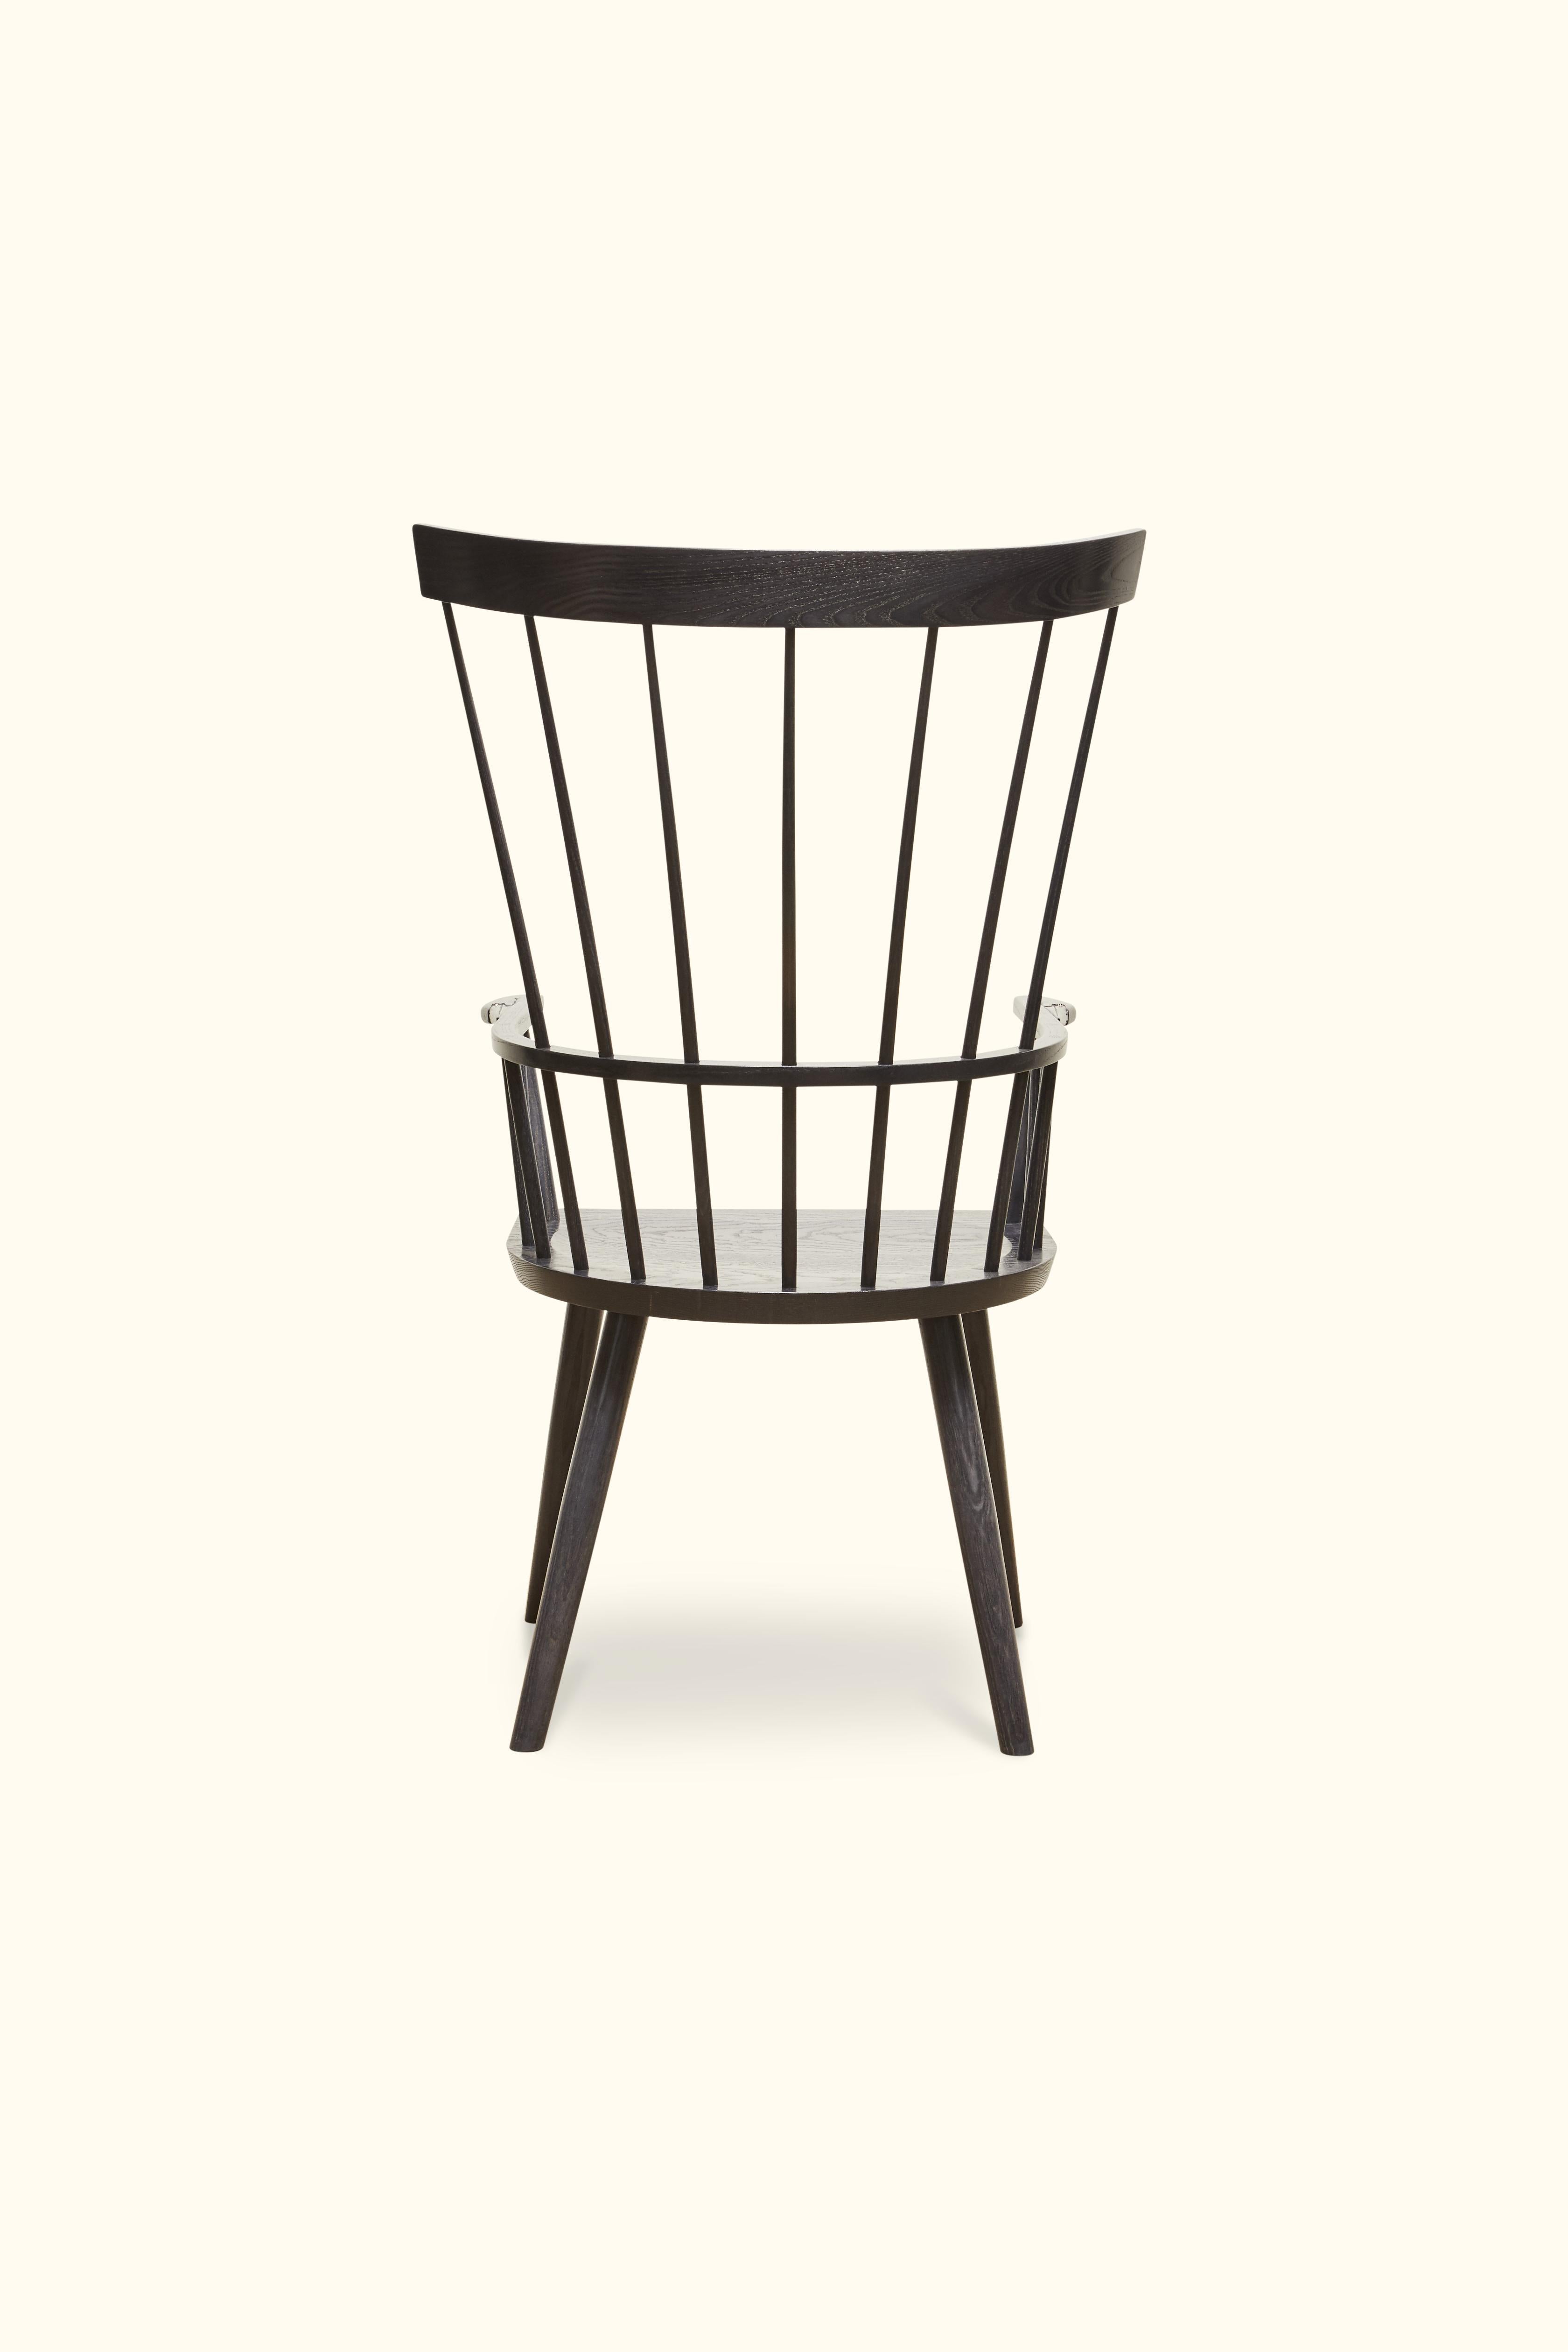 Hand carved crane heads have been added to the arms of this one of a kind chair. The colt high-back armchair is generous in scale with a comfortably deep seat and supportive flexible back a signature feature of all Classic Windsor chairs making it